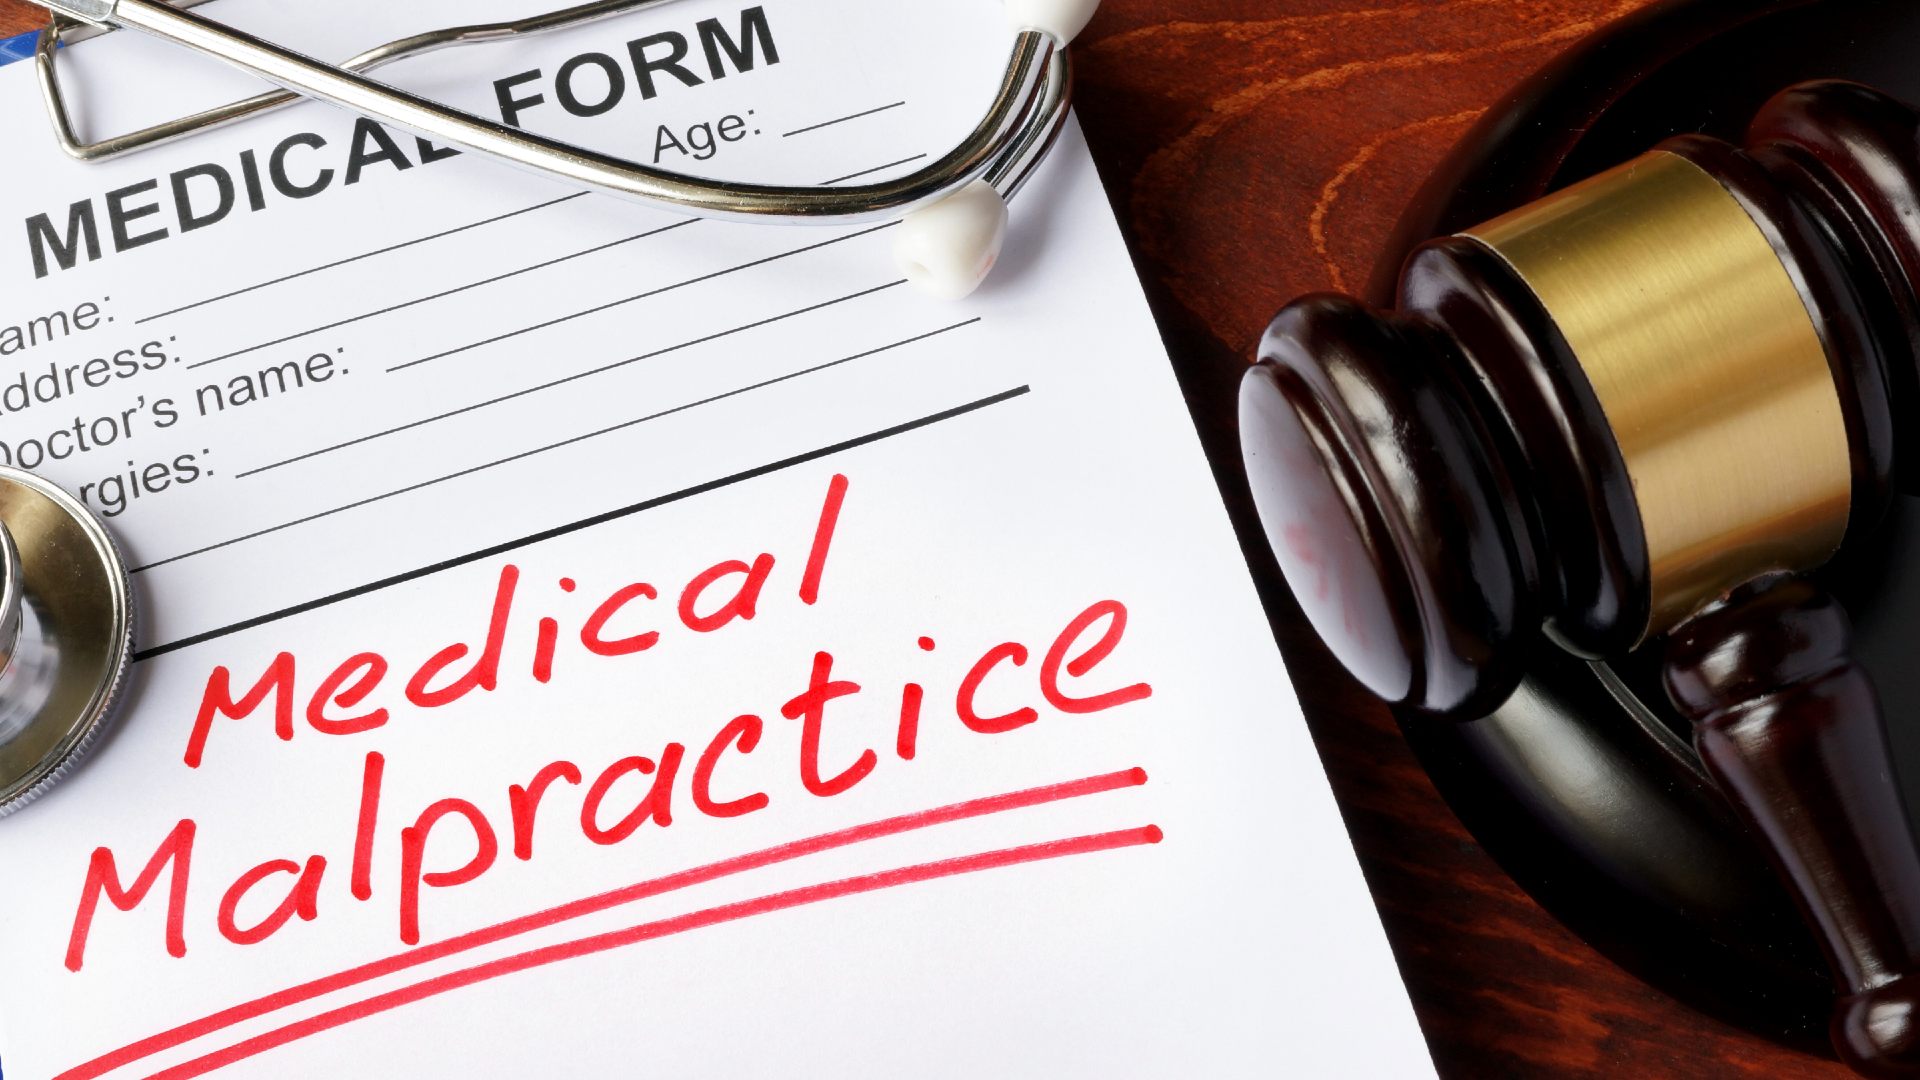 A medical malpractice form with a stethoscope and a gavel sitting on top